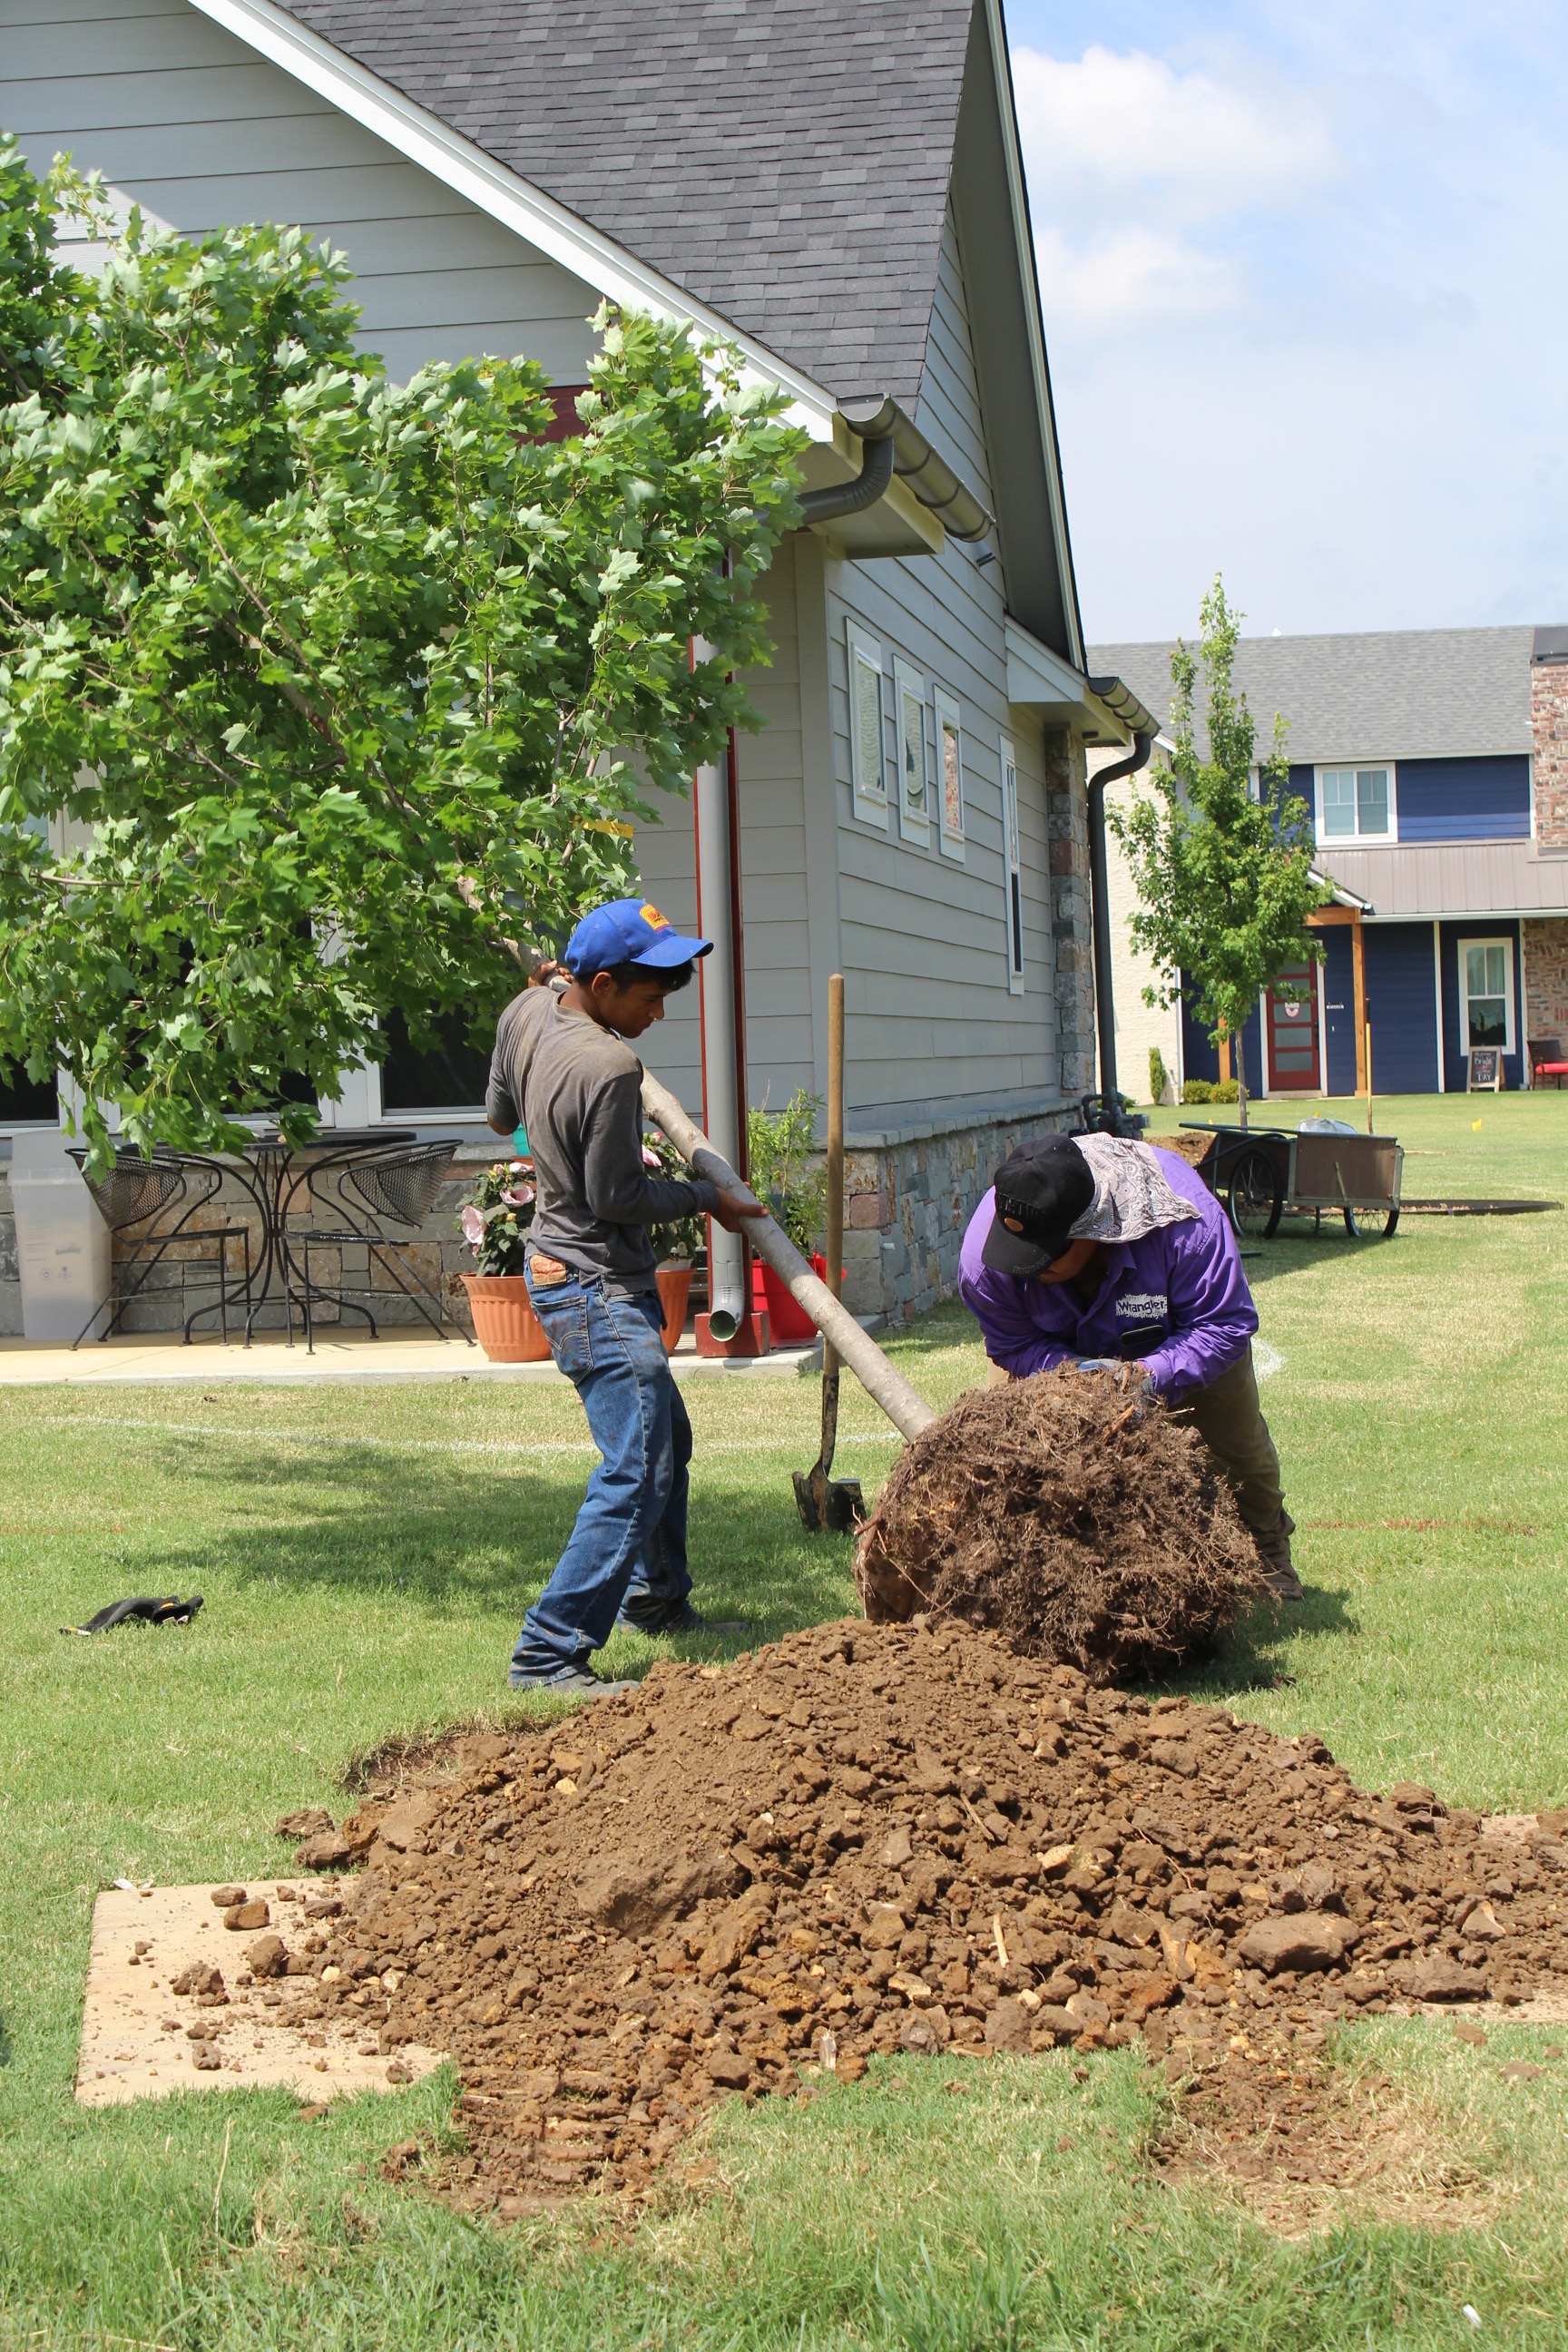 Image of two workers shoveling dirt in grass yard